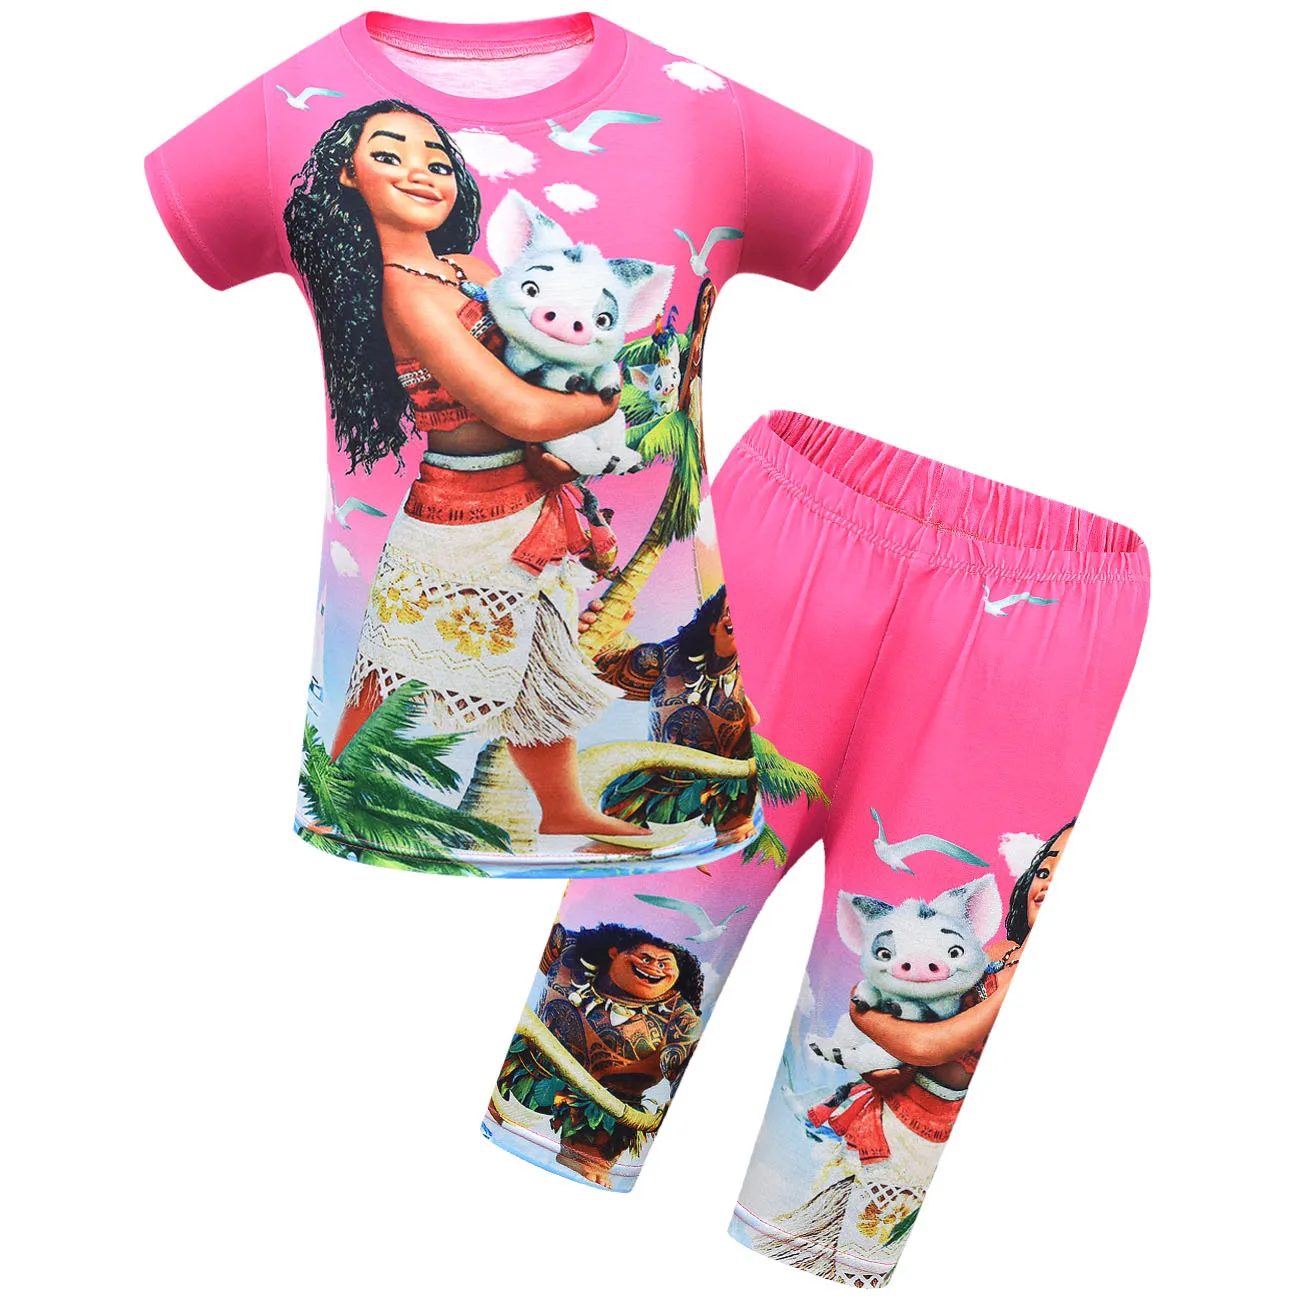 Baby Girls Disney Moana Outfits Summer Birthday Party Top Shorts Clothes Set 